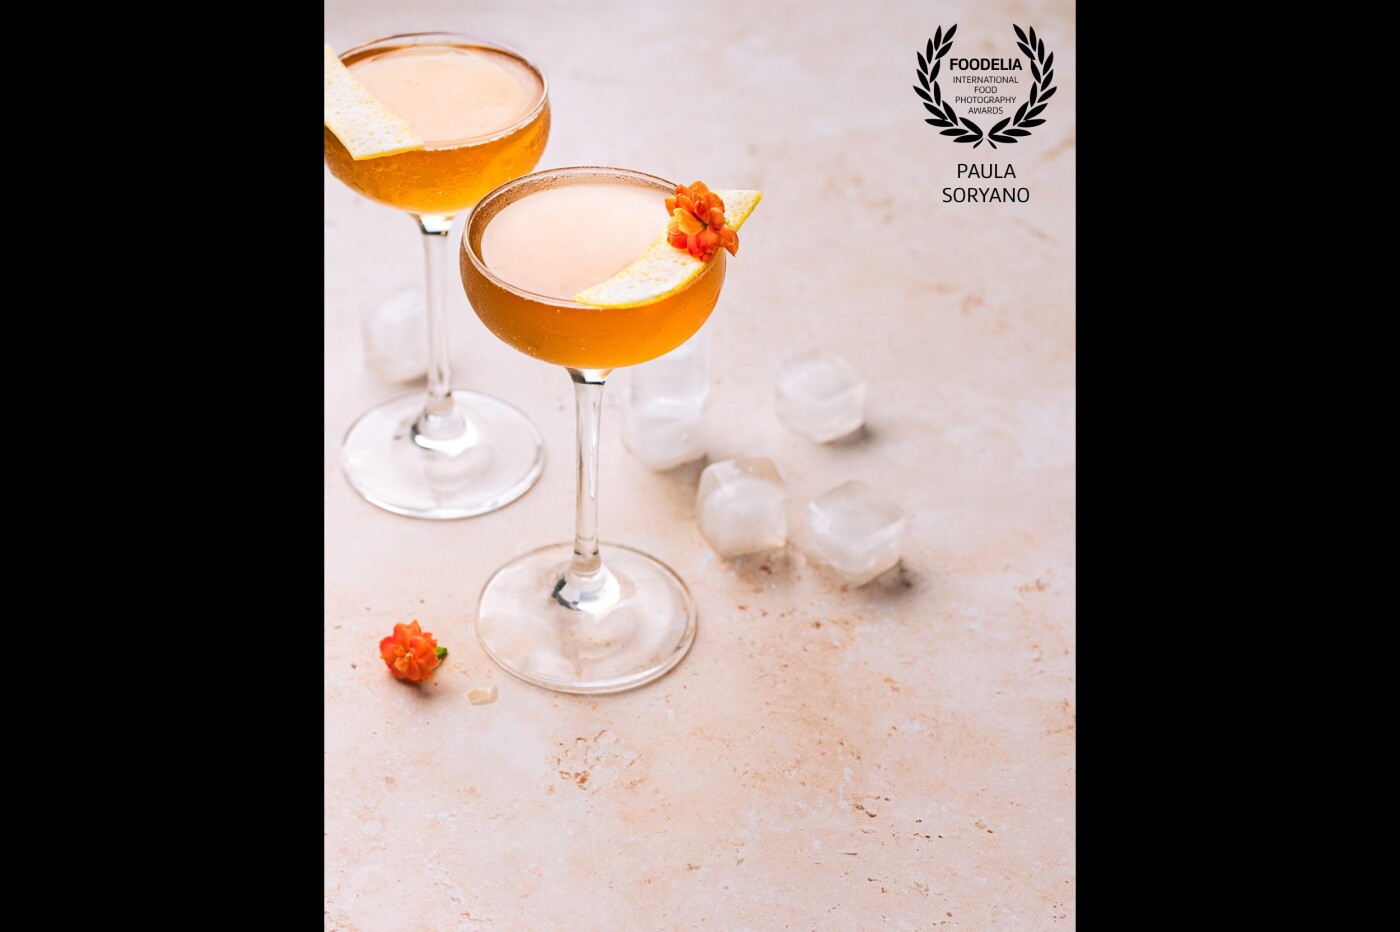 In the search for minimalism, I photographed this monochromatic peach mocktail.<br />
I like to play with different sorts of garnishes, use real ice cubes and create an airy feeling thanks to the use of backlighting.